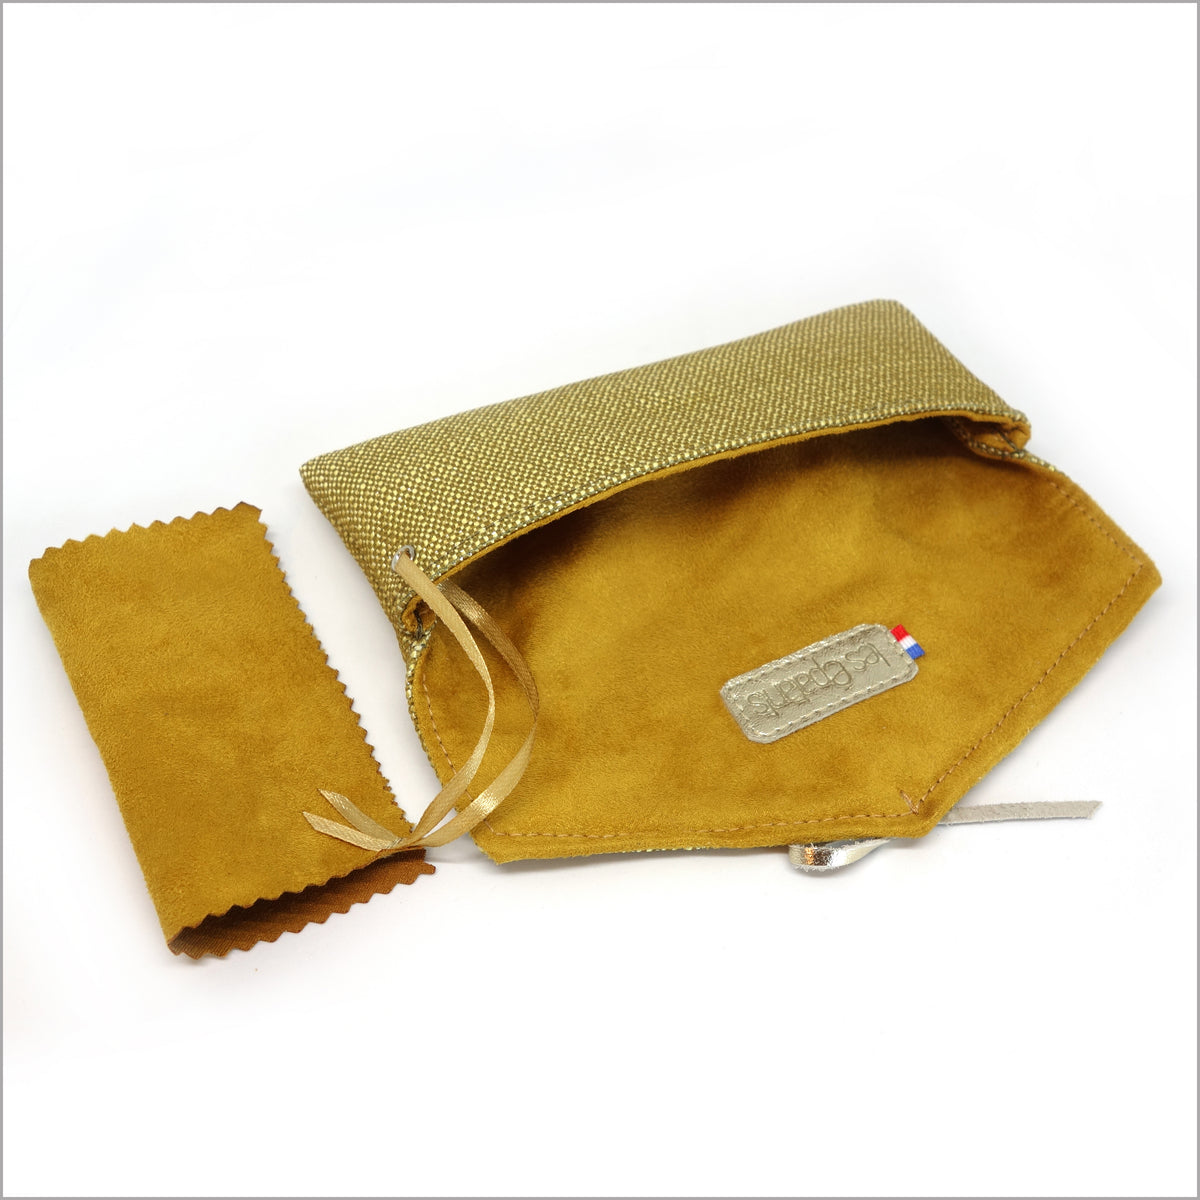 Soft glasses case in mustard yellow linen and silver lurex